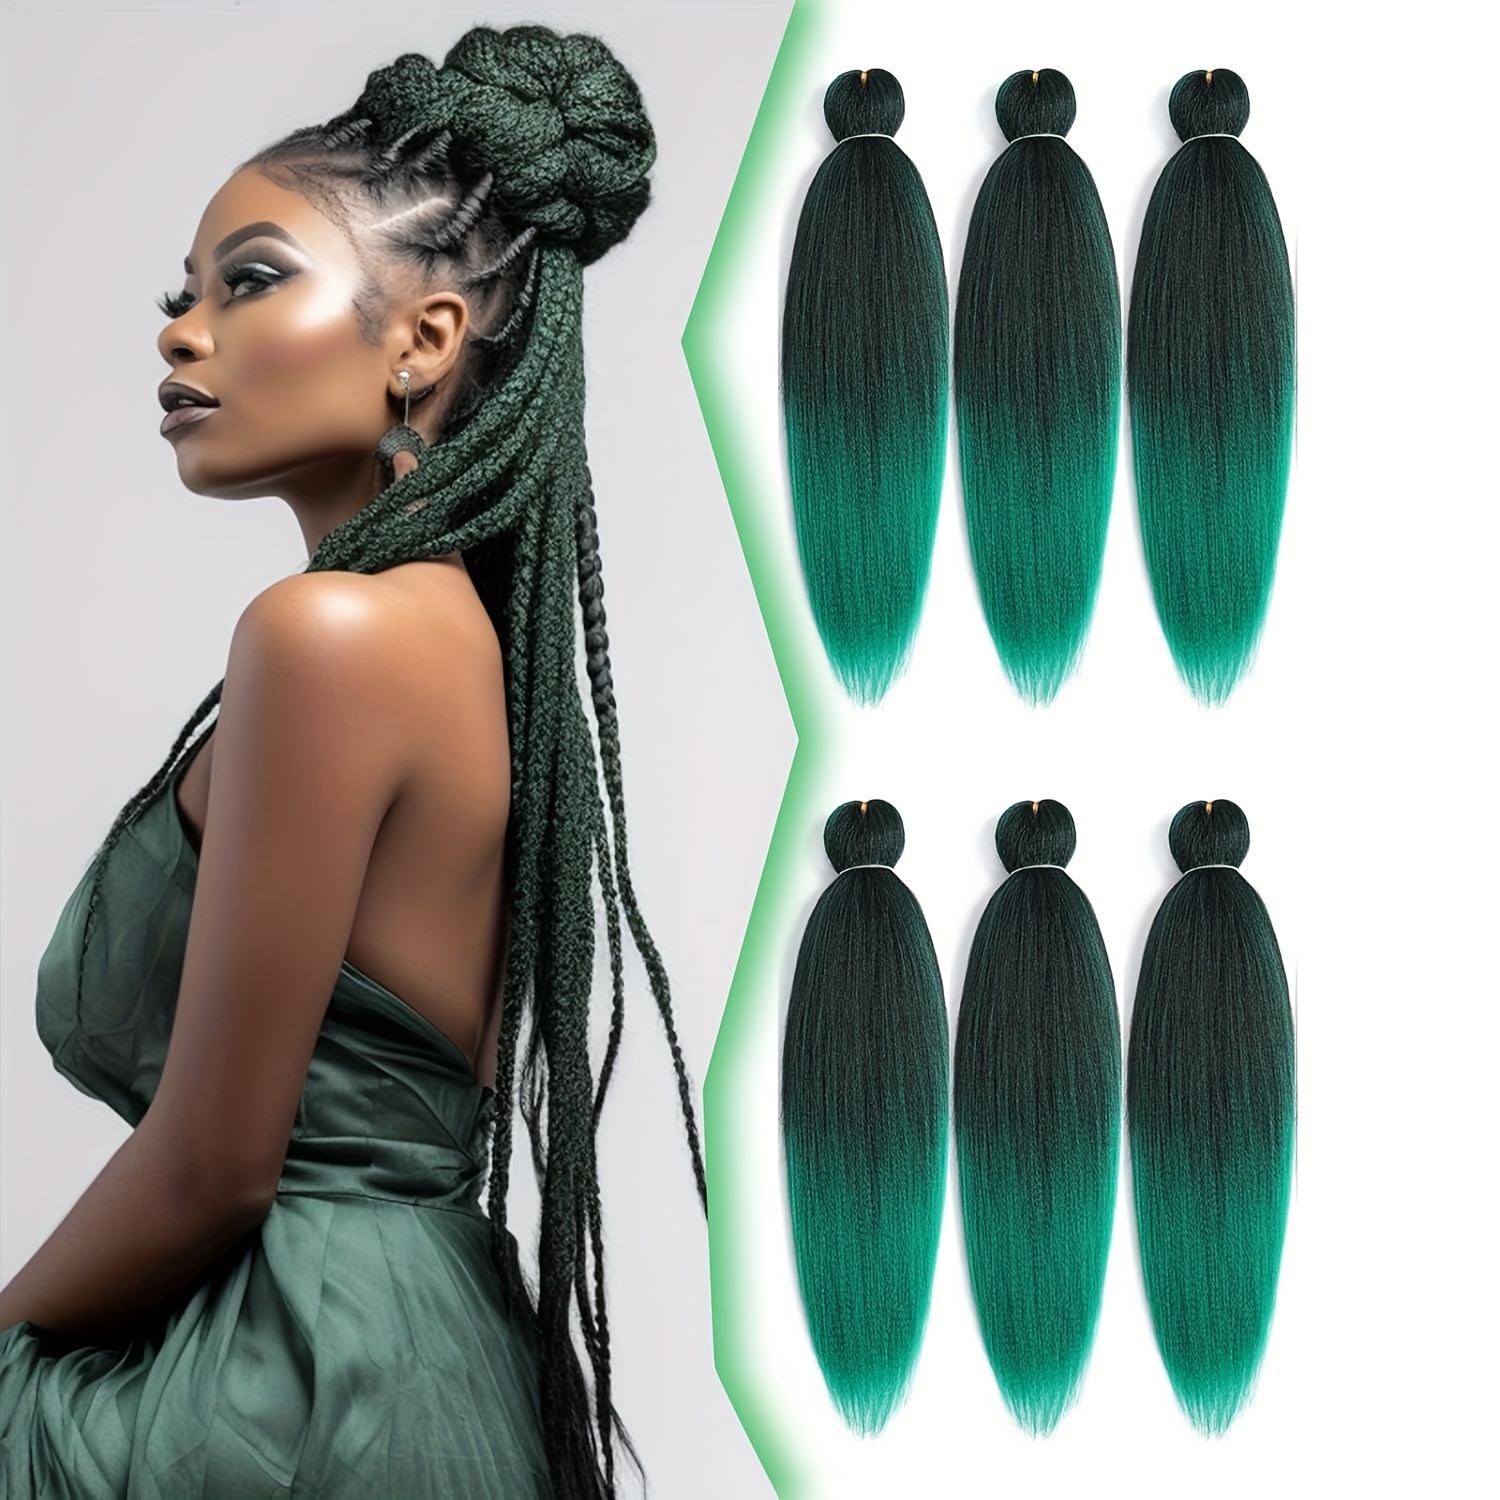  Ombre Dark Green Braiding Hair Pre stretched Kanekalon Knotless  Braiding Hair for Braids（Packs of 3,26,10 OZ） : Beauty & Personal Care